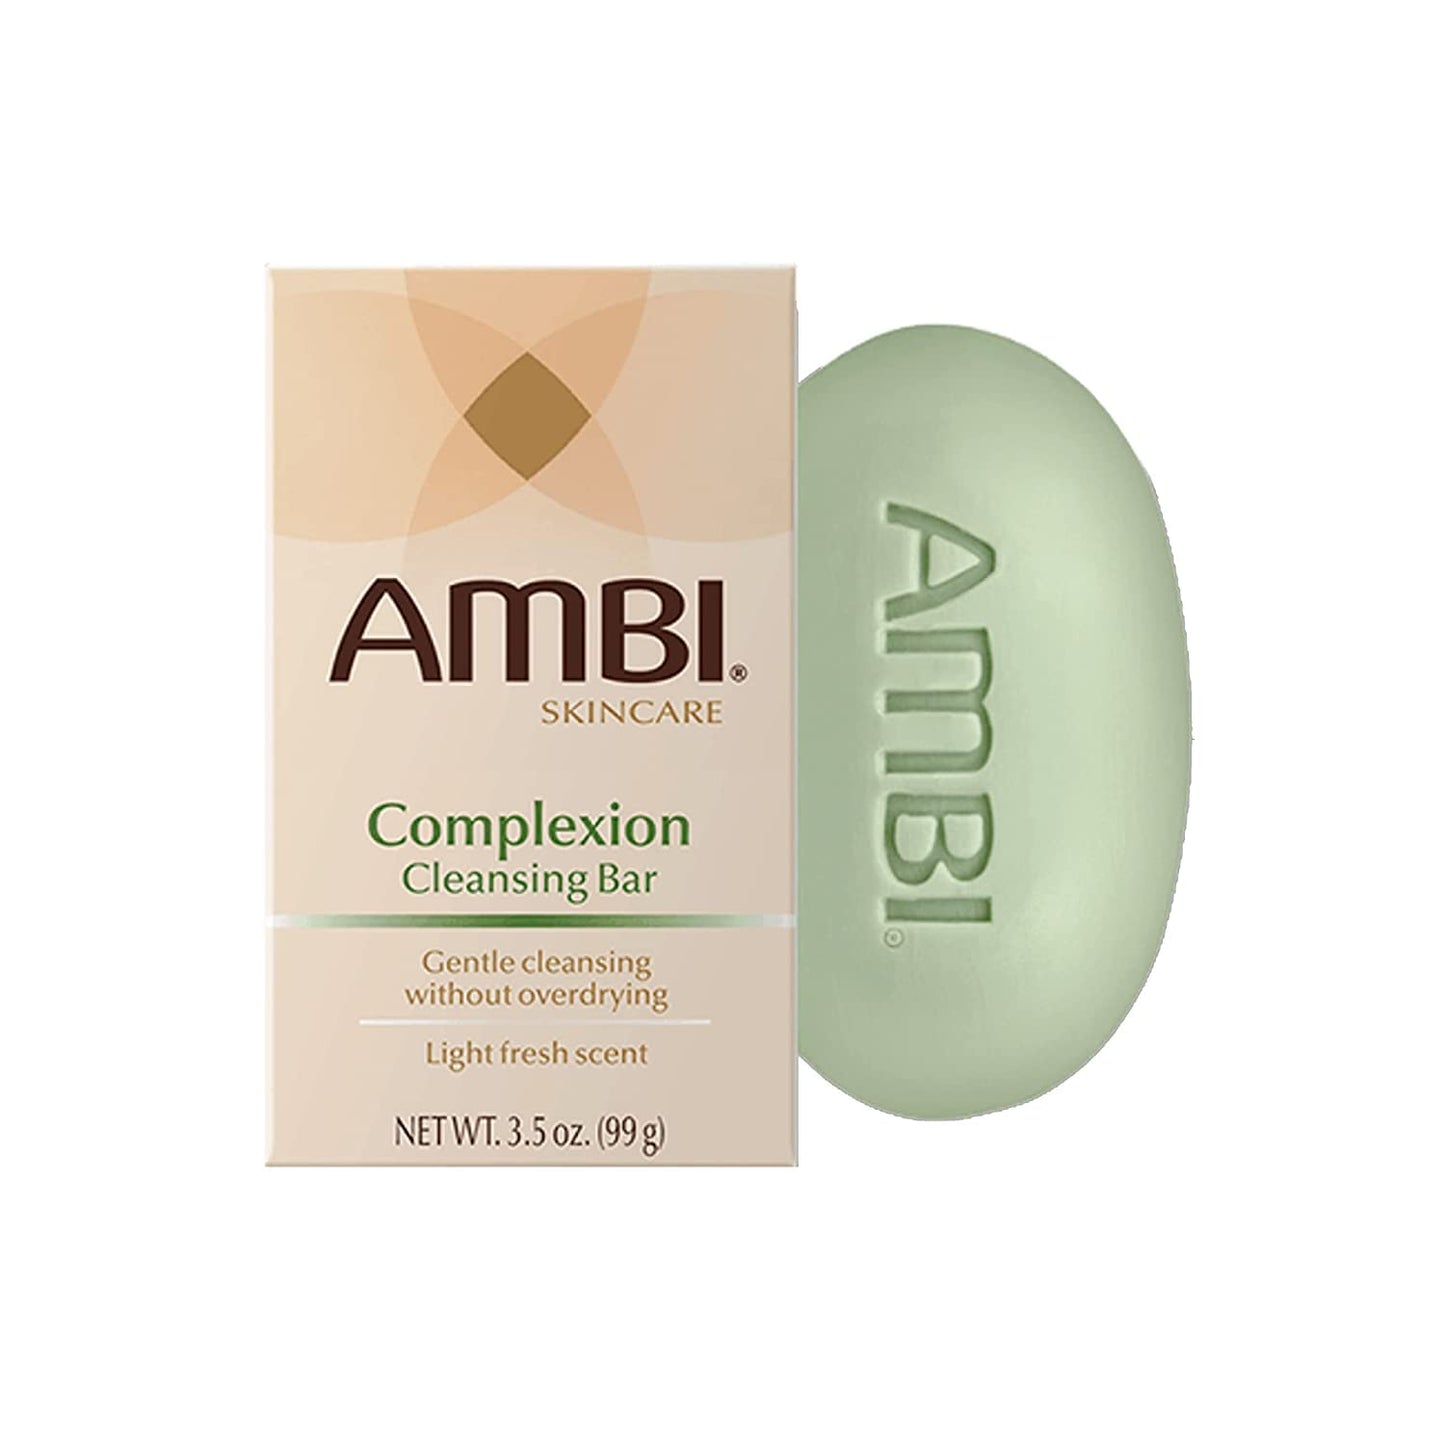 Ambi - Complexion cleansing bar - 99g - Ambi - Ethni Beauty Market